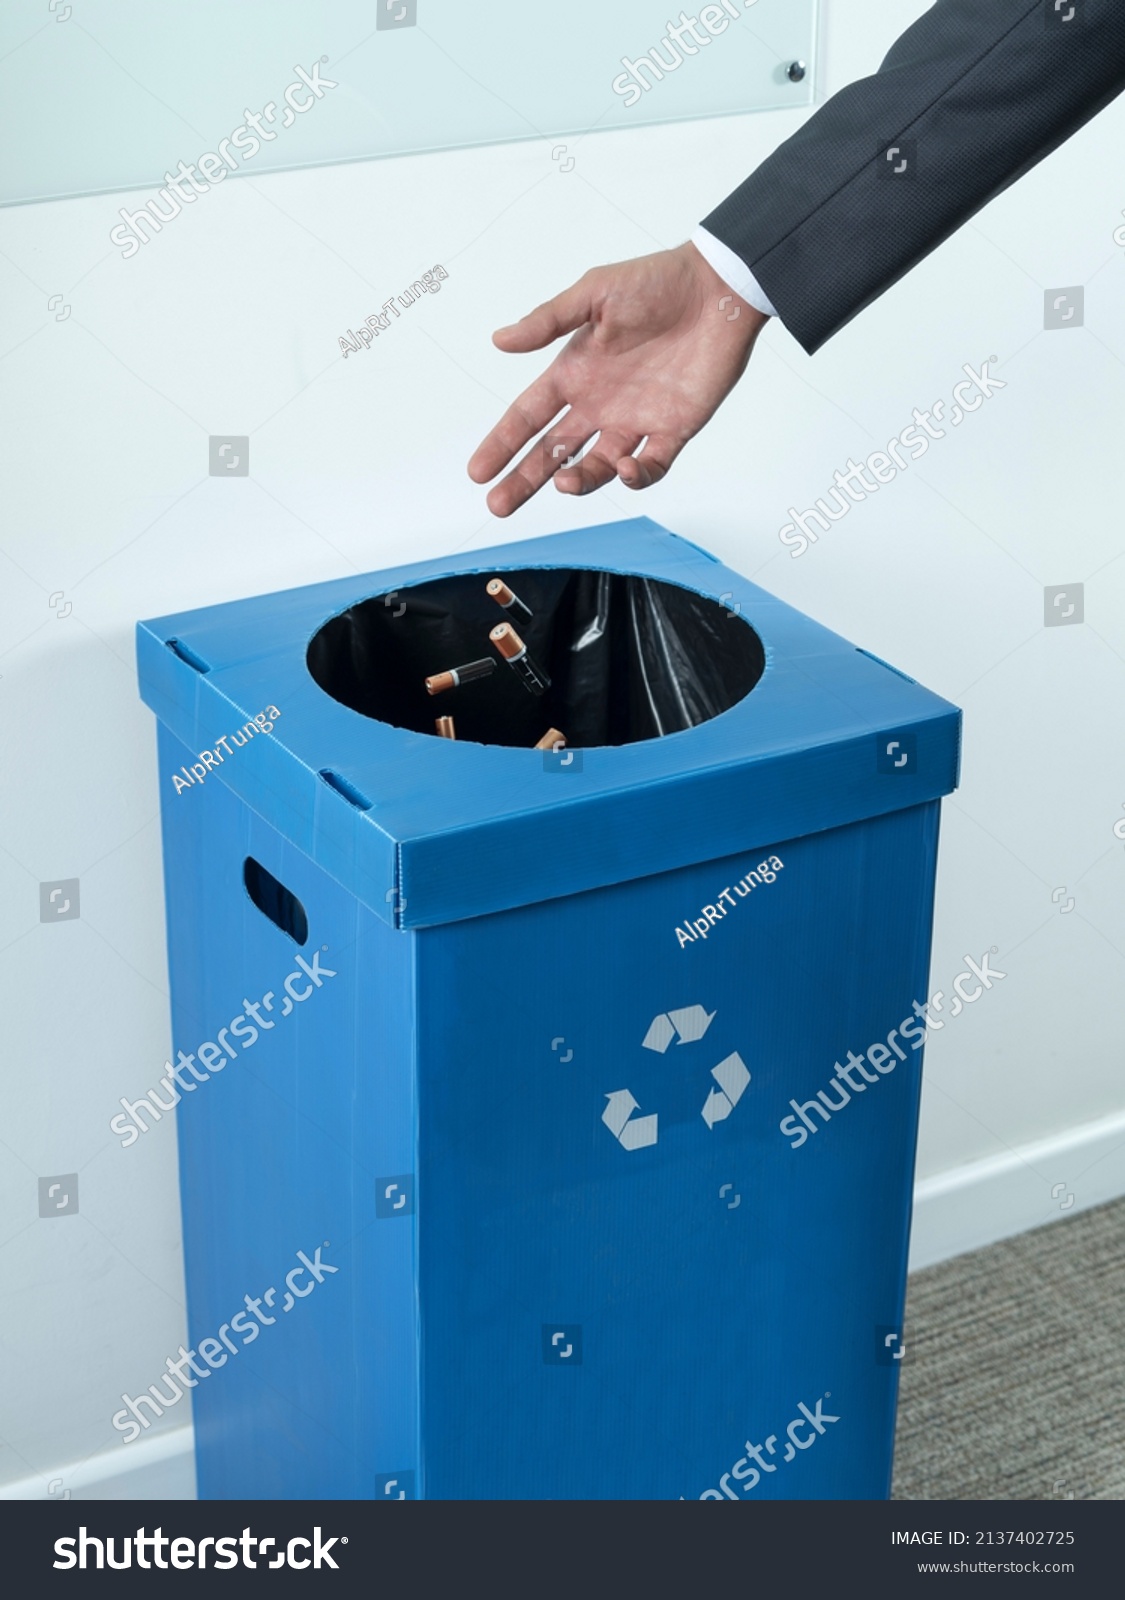 Mans hand throws the batteries into a special trash can for the separate collection of hazardous waste. Environment ecology concept. Illustrative editorial.  #2137402725